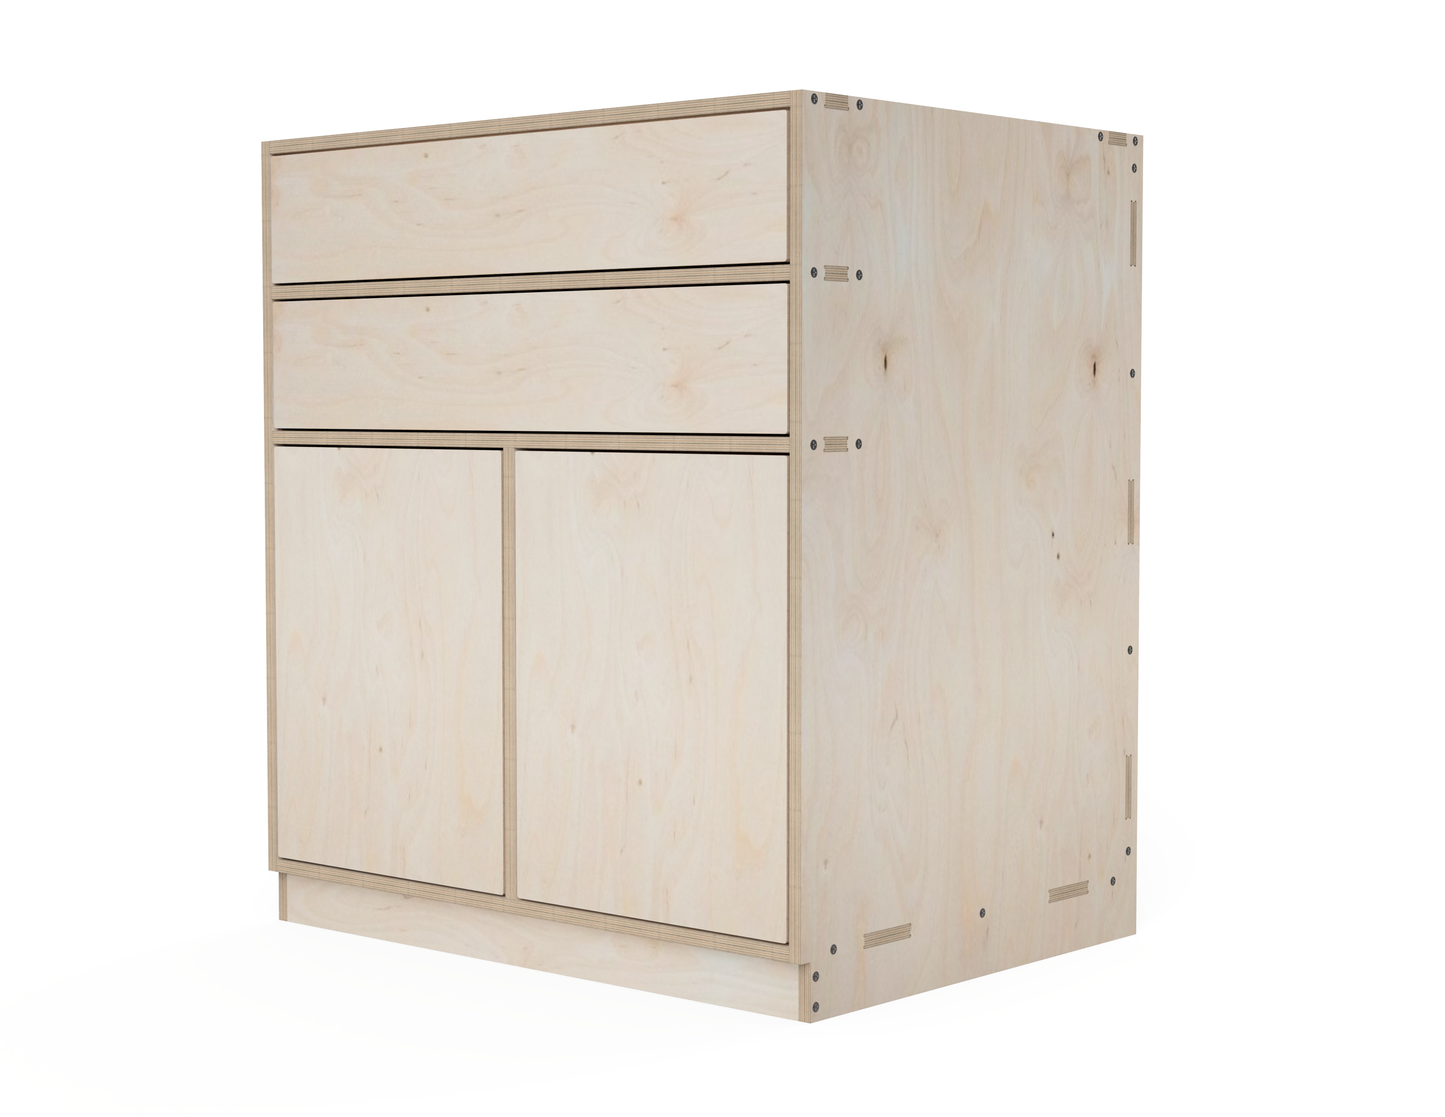 Double Kitchen Cabinet - Large Drawers (Inset Door Cabinets) DXF Files